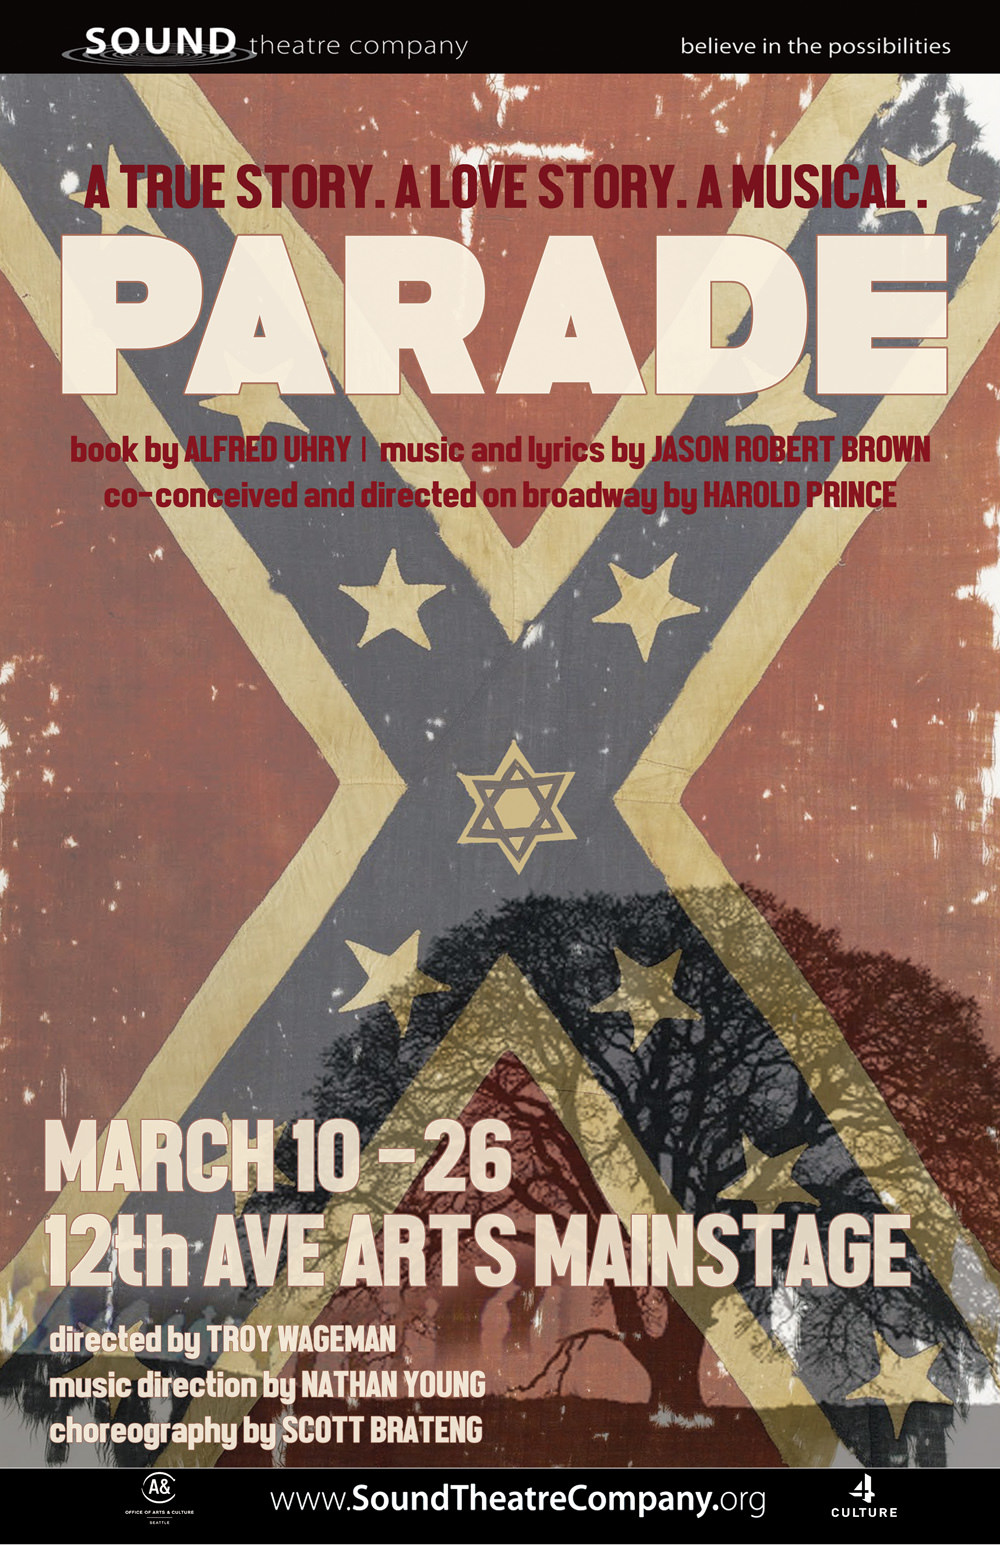 Poster for PARADE the musical, 1